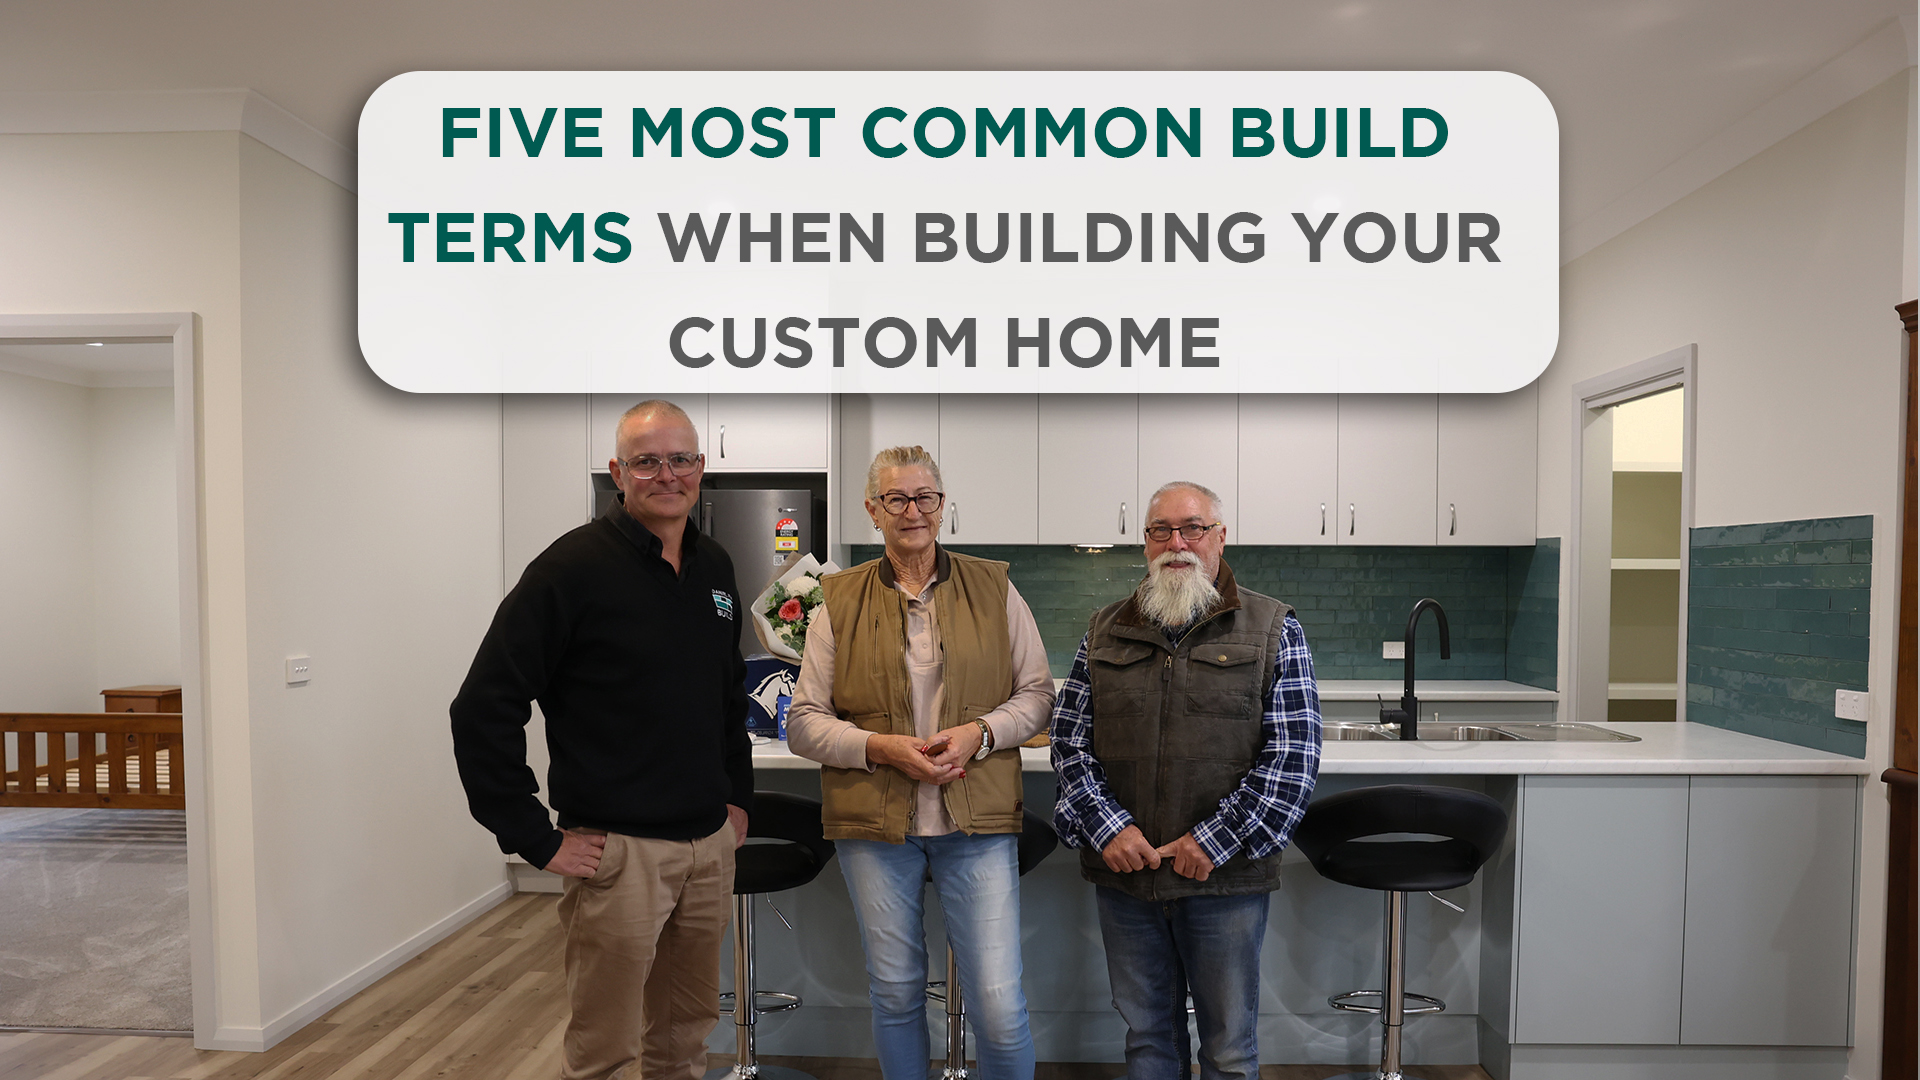 The Most Common Build Terms When Building A Custom Home